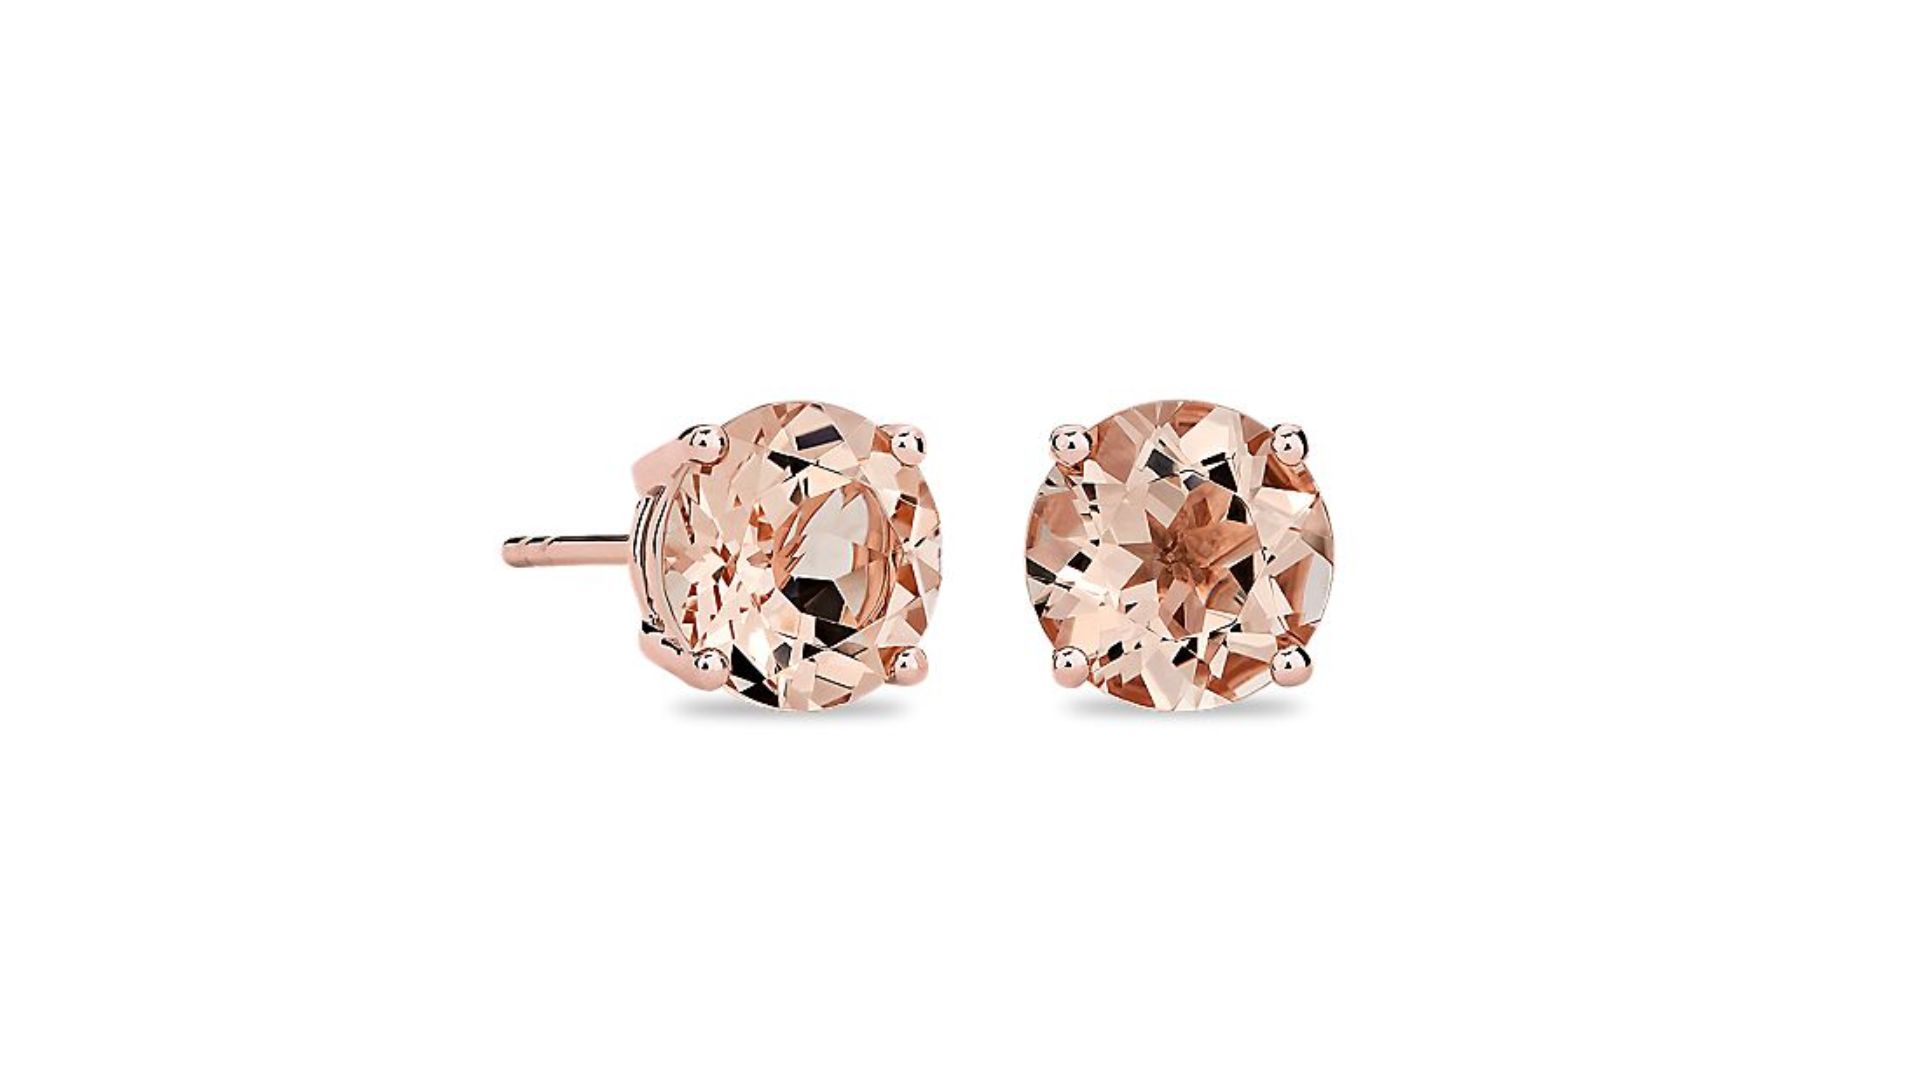 Morganite Earrings - The Timeless Beauty And Sparkling Elegance